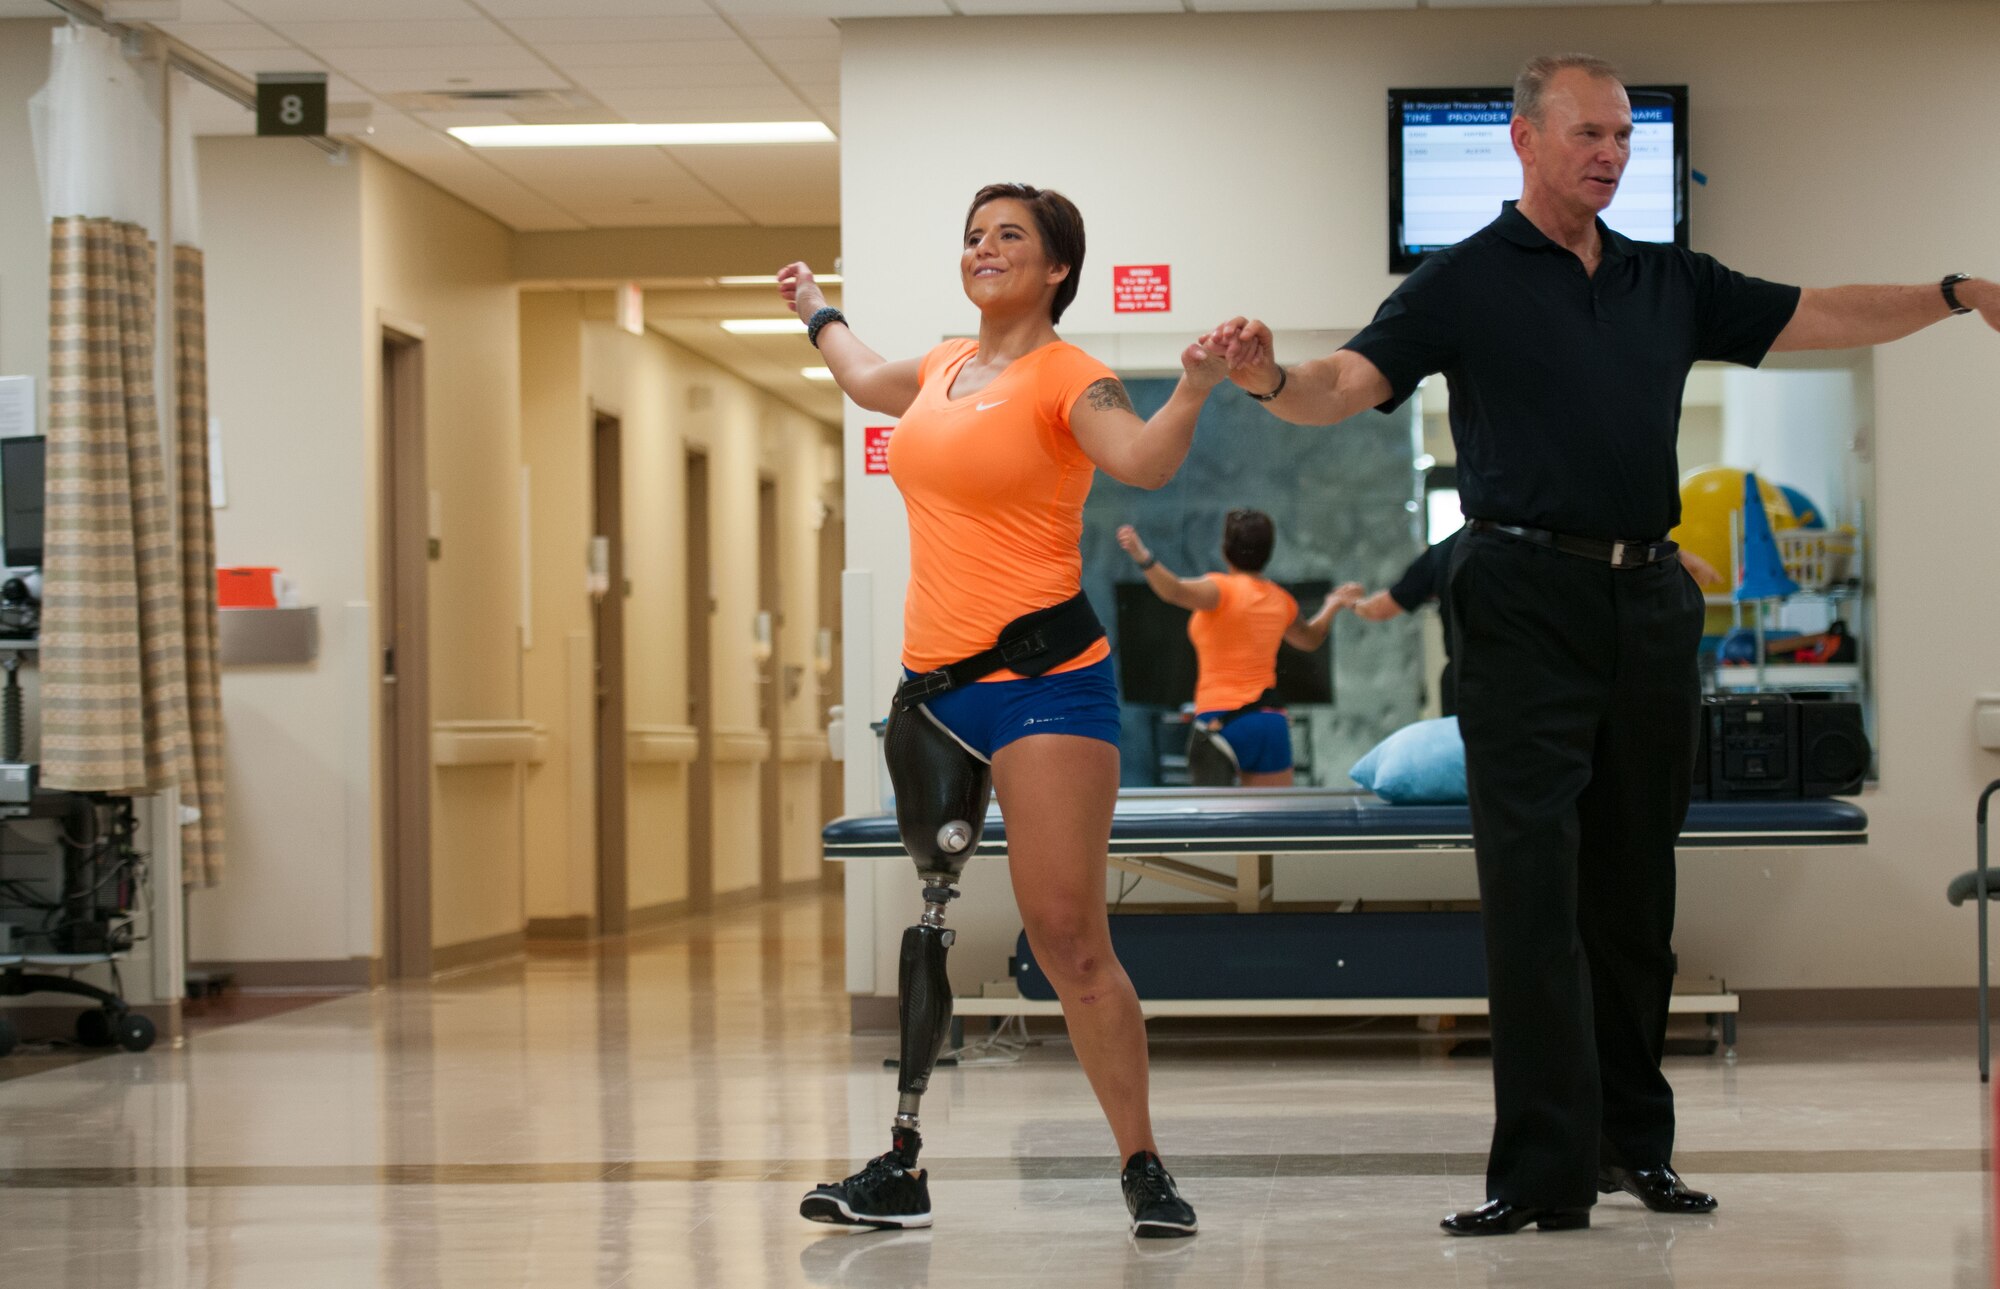 Staff Sgt. Sebastiana Lopez Arellano, a patient at Walter Reed National Military Medical Center in Bethesda, Md., learns some dance moves from volunteer Joe Kiballa on April 16, 2016. Lopez lost her right leg and suffered several other injuries in a motorcycle crash in 2015. She now uses sports and fitness as part of her physical and occupational therapy regimen. (U.S. Air Force photo/Sean Kimmons)